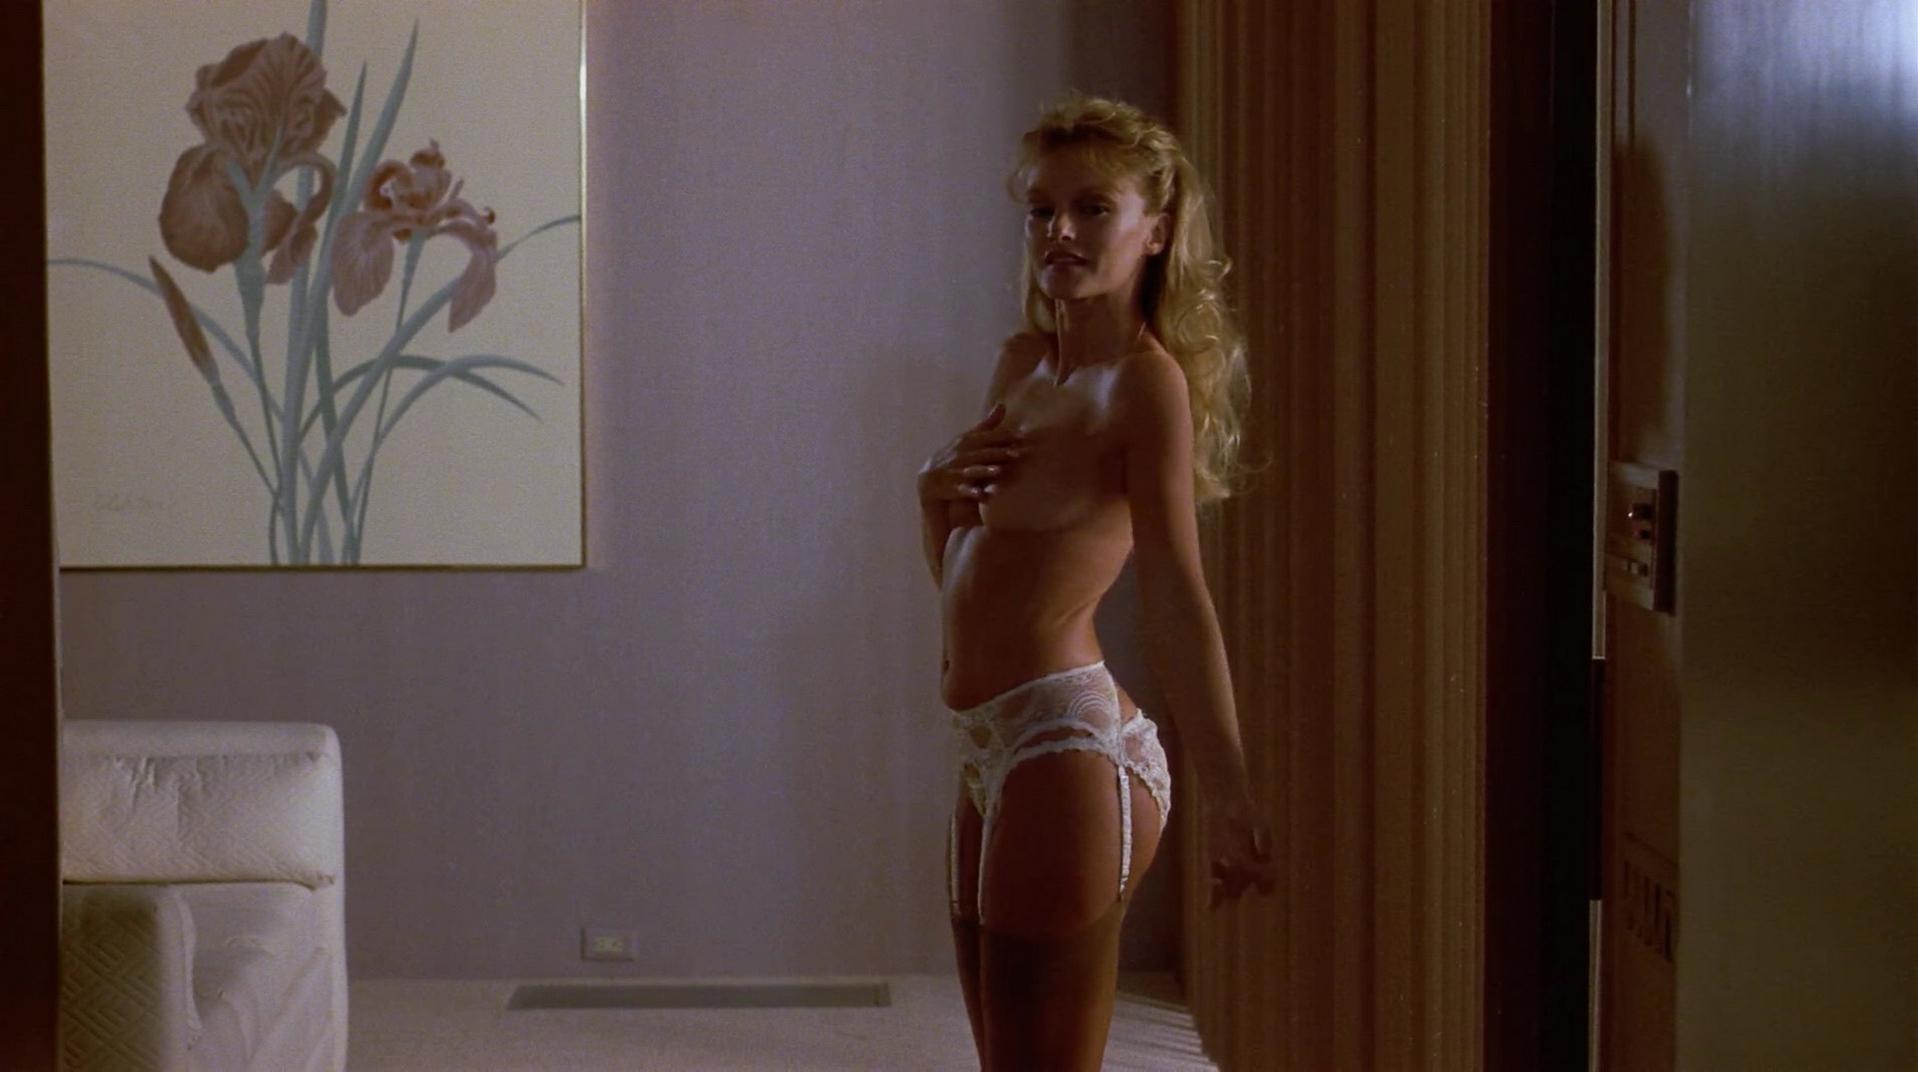 Arielle Dombasle nude - The Boss Wife (1986)